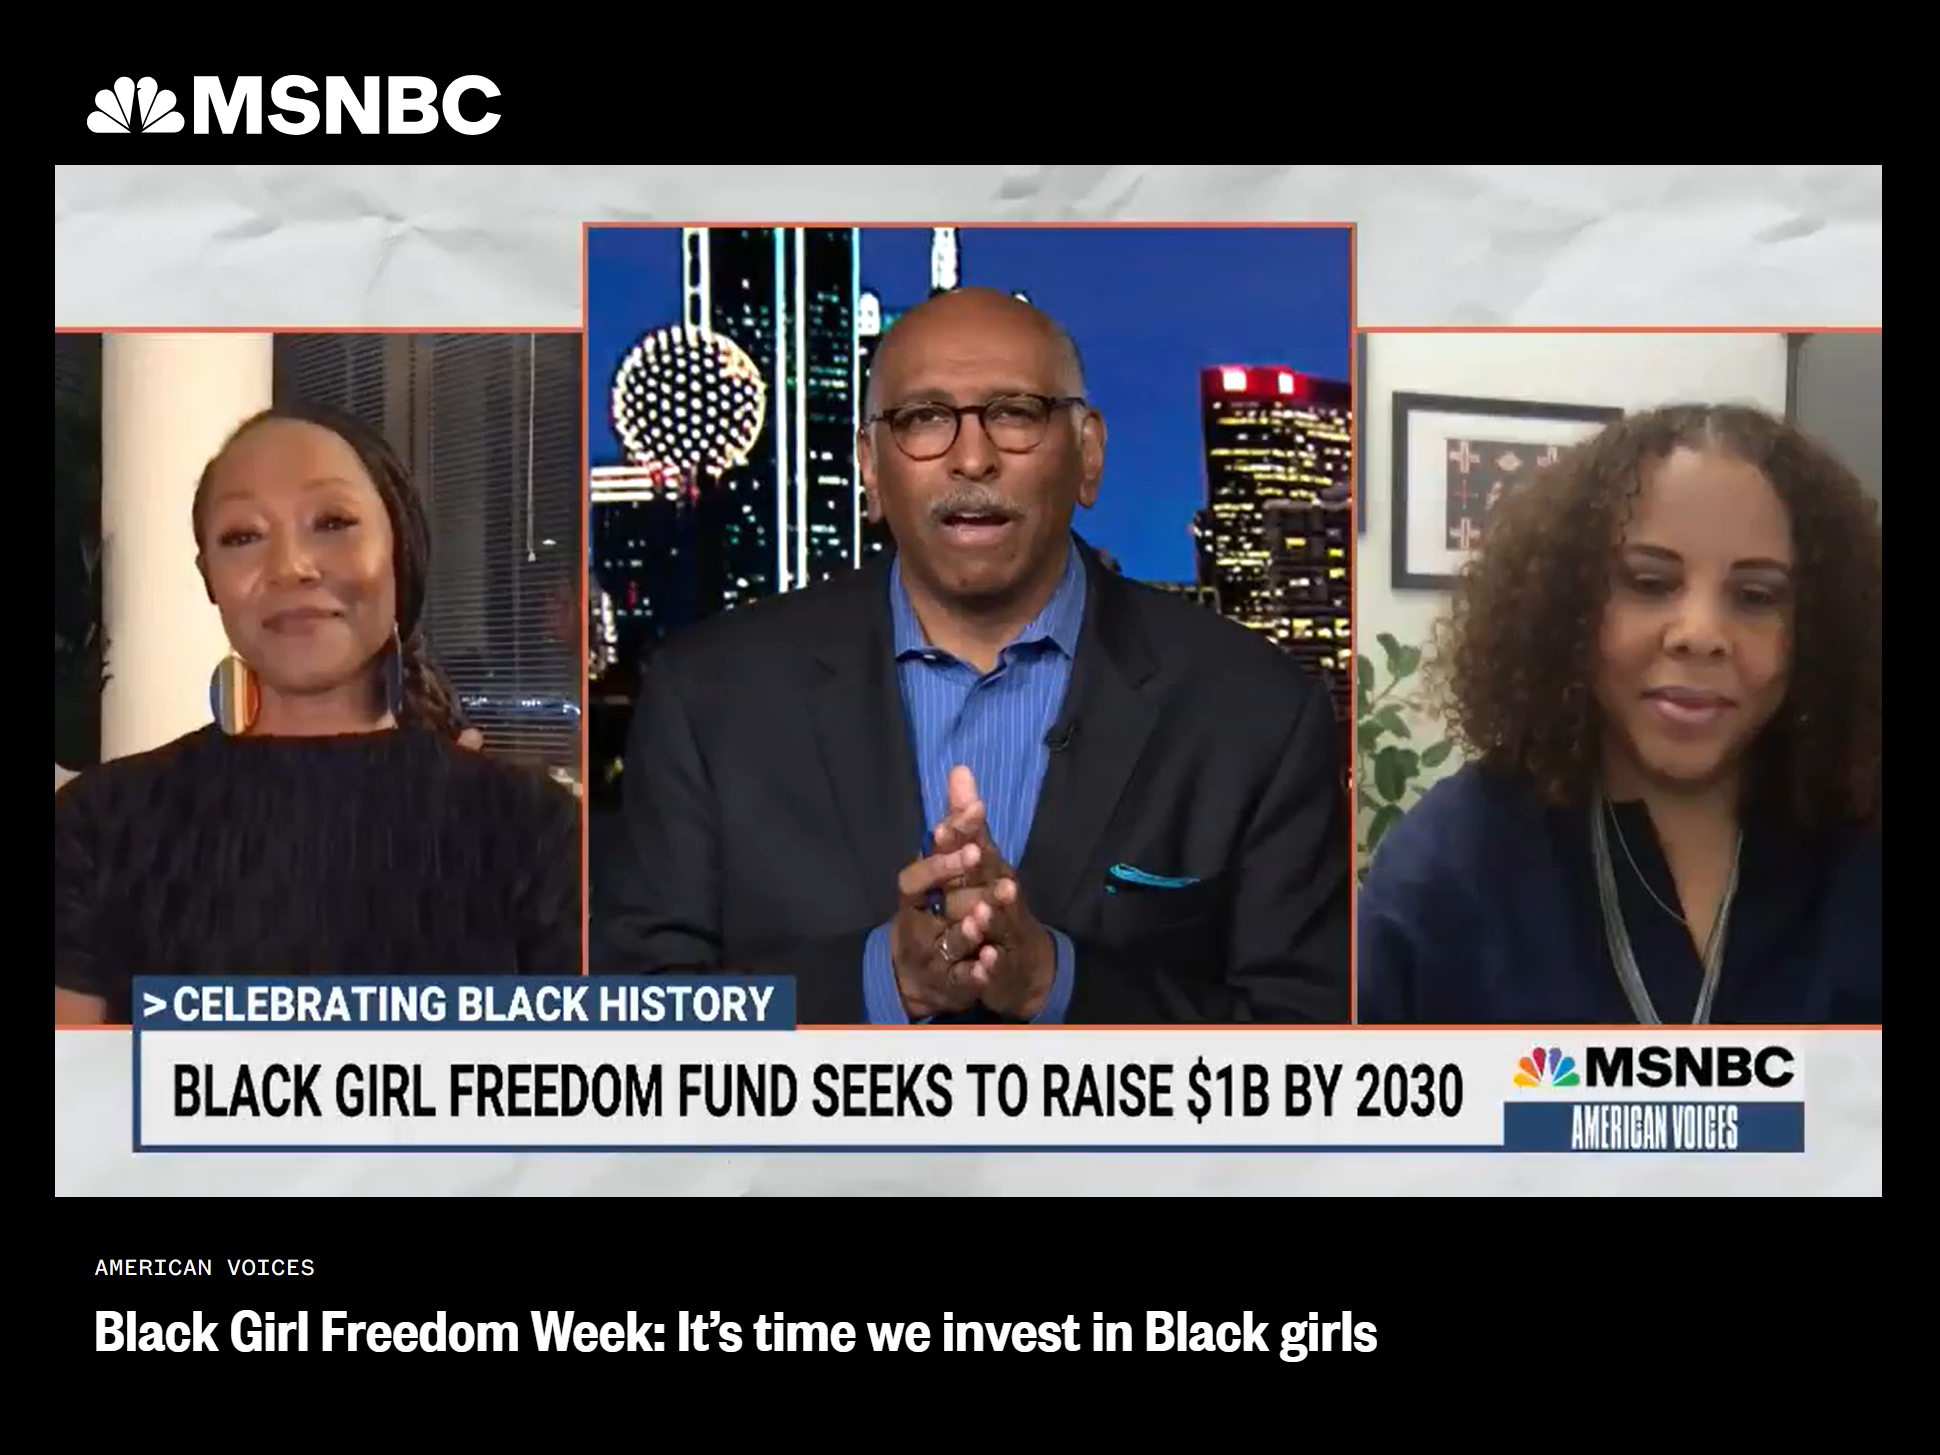 MSNBC feature: “Black Girl Freedom Week: It’s time we invest in Black girls”